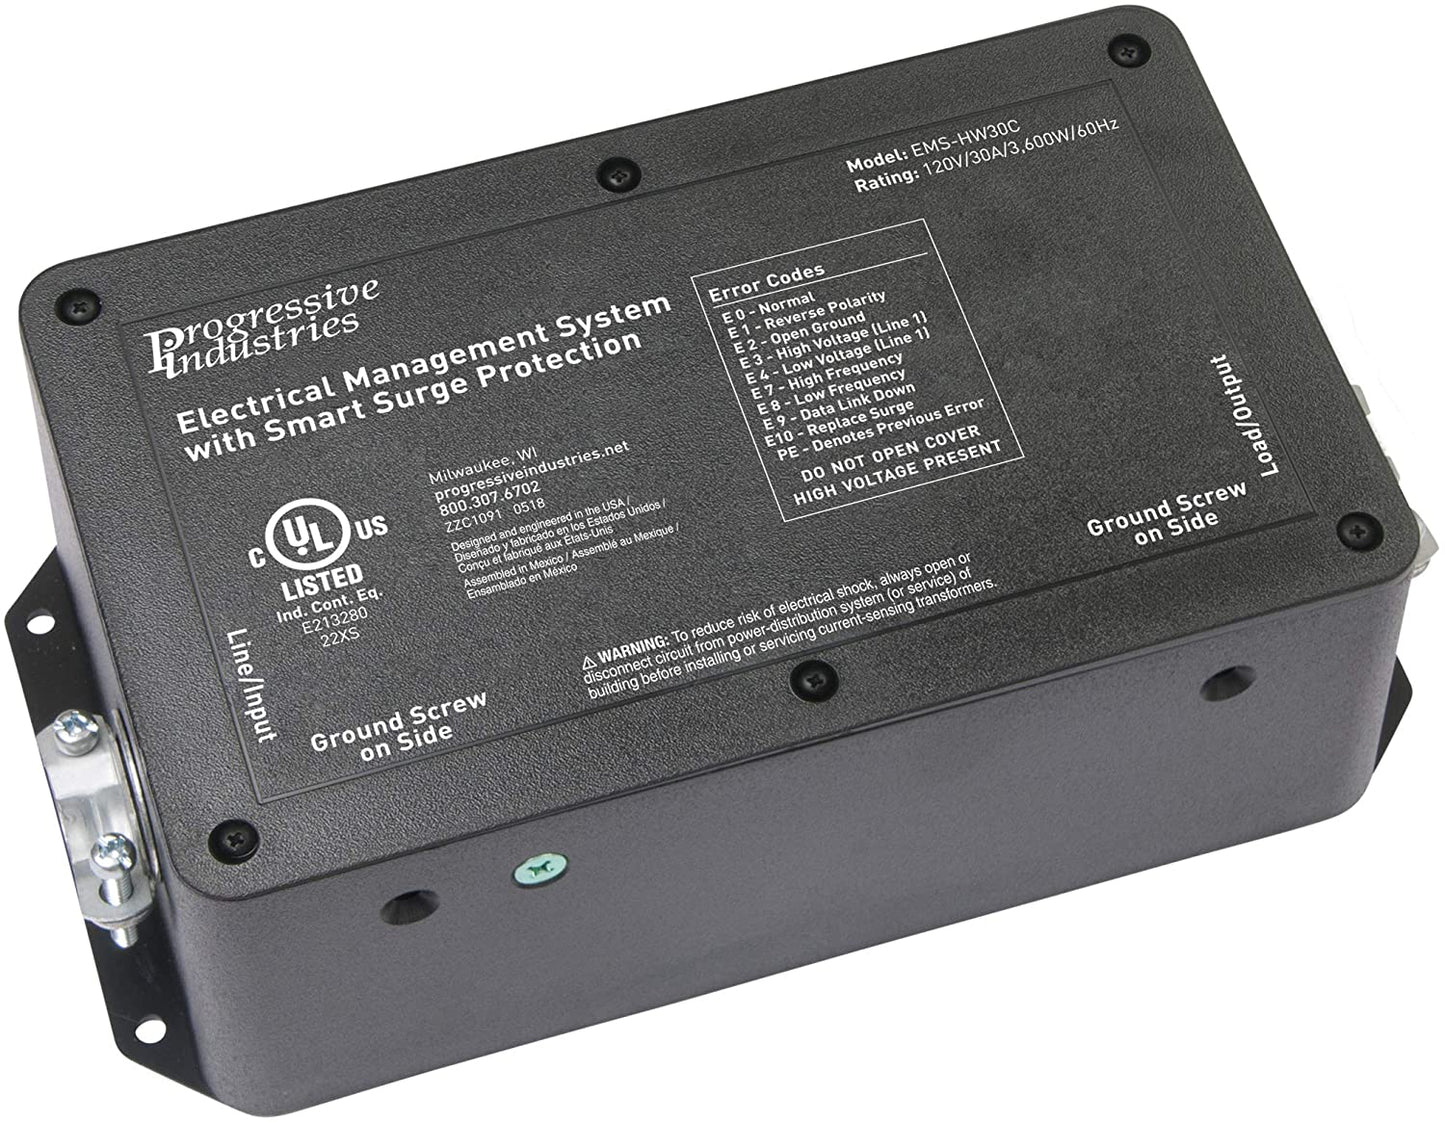 Progressive Industries EMS-HW30C Hardwired RV Surge & Electrical Protector, 30A w/Remote Display